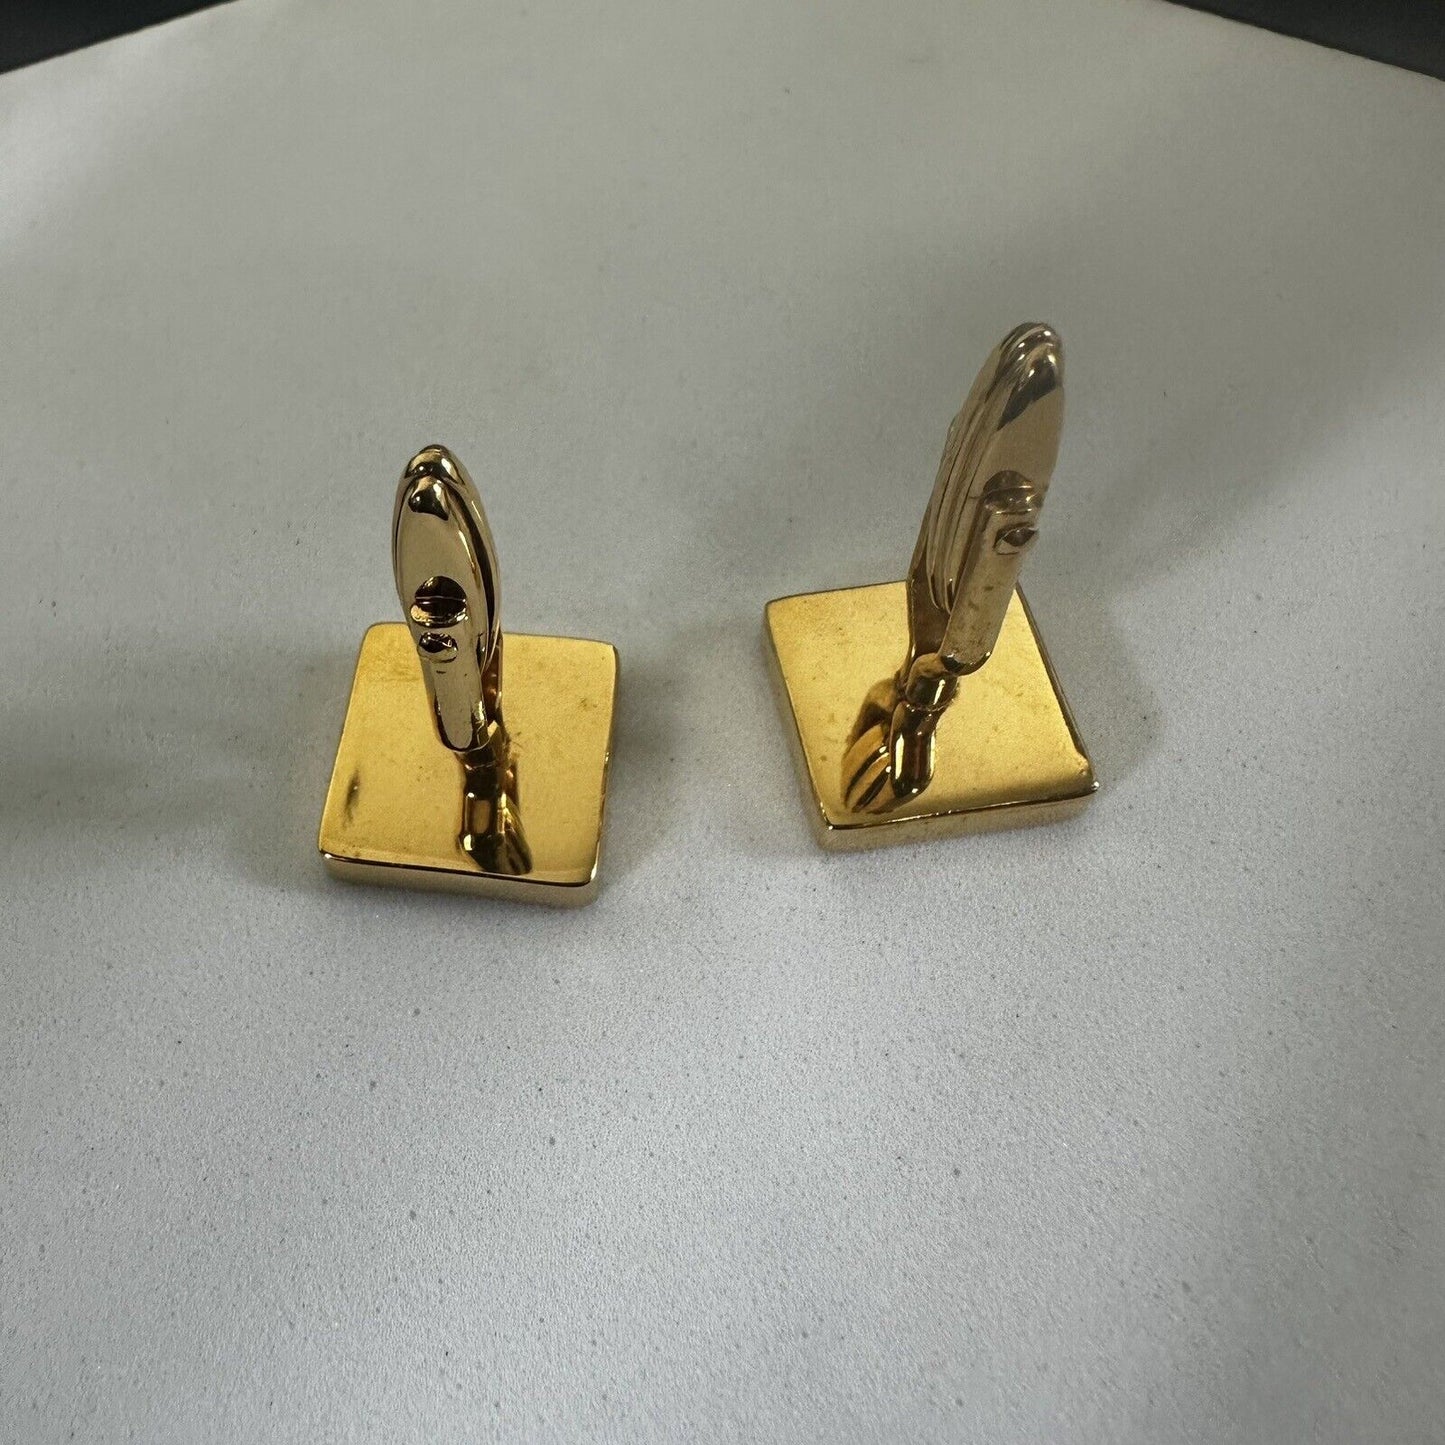 Dunhill Cufflinks Silver Gold Two Tone Authentic